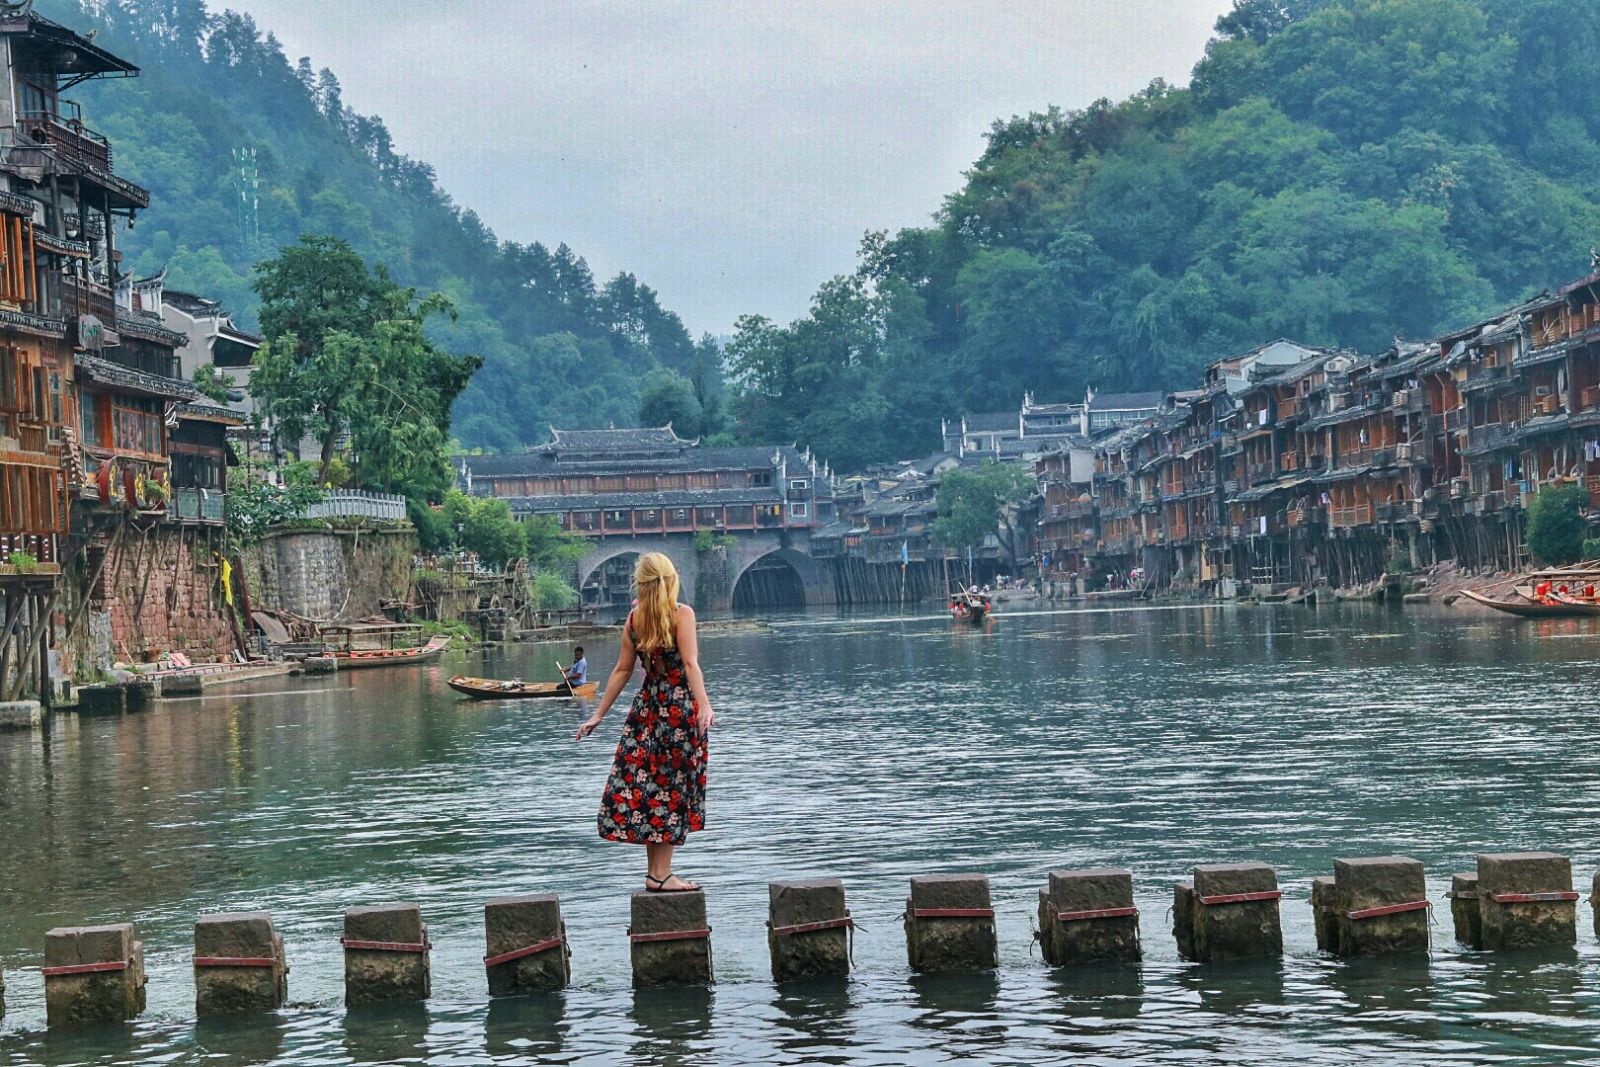 stepping-stone-bridge-fenghuang-ancient-town-vemaybay123